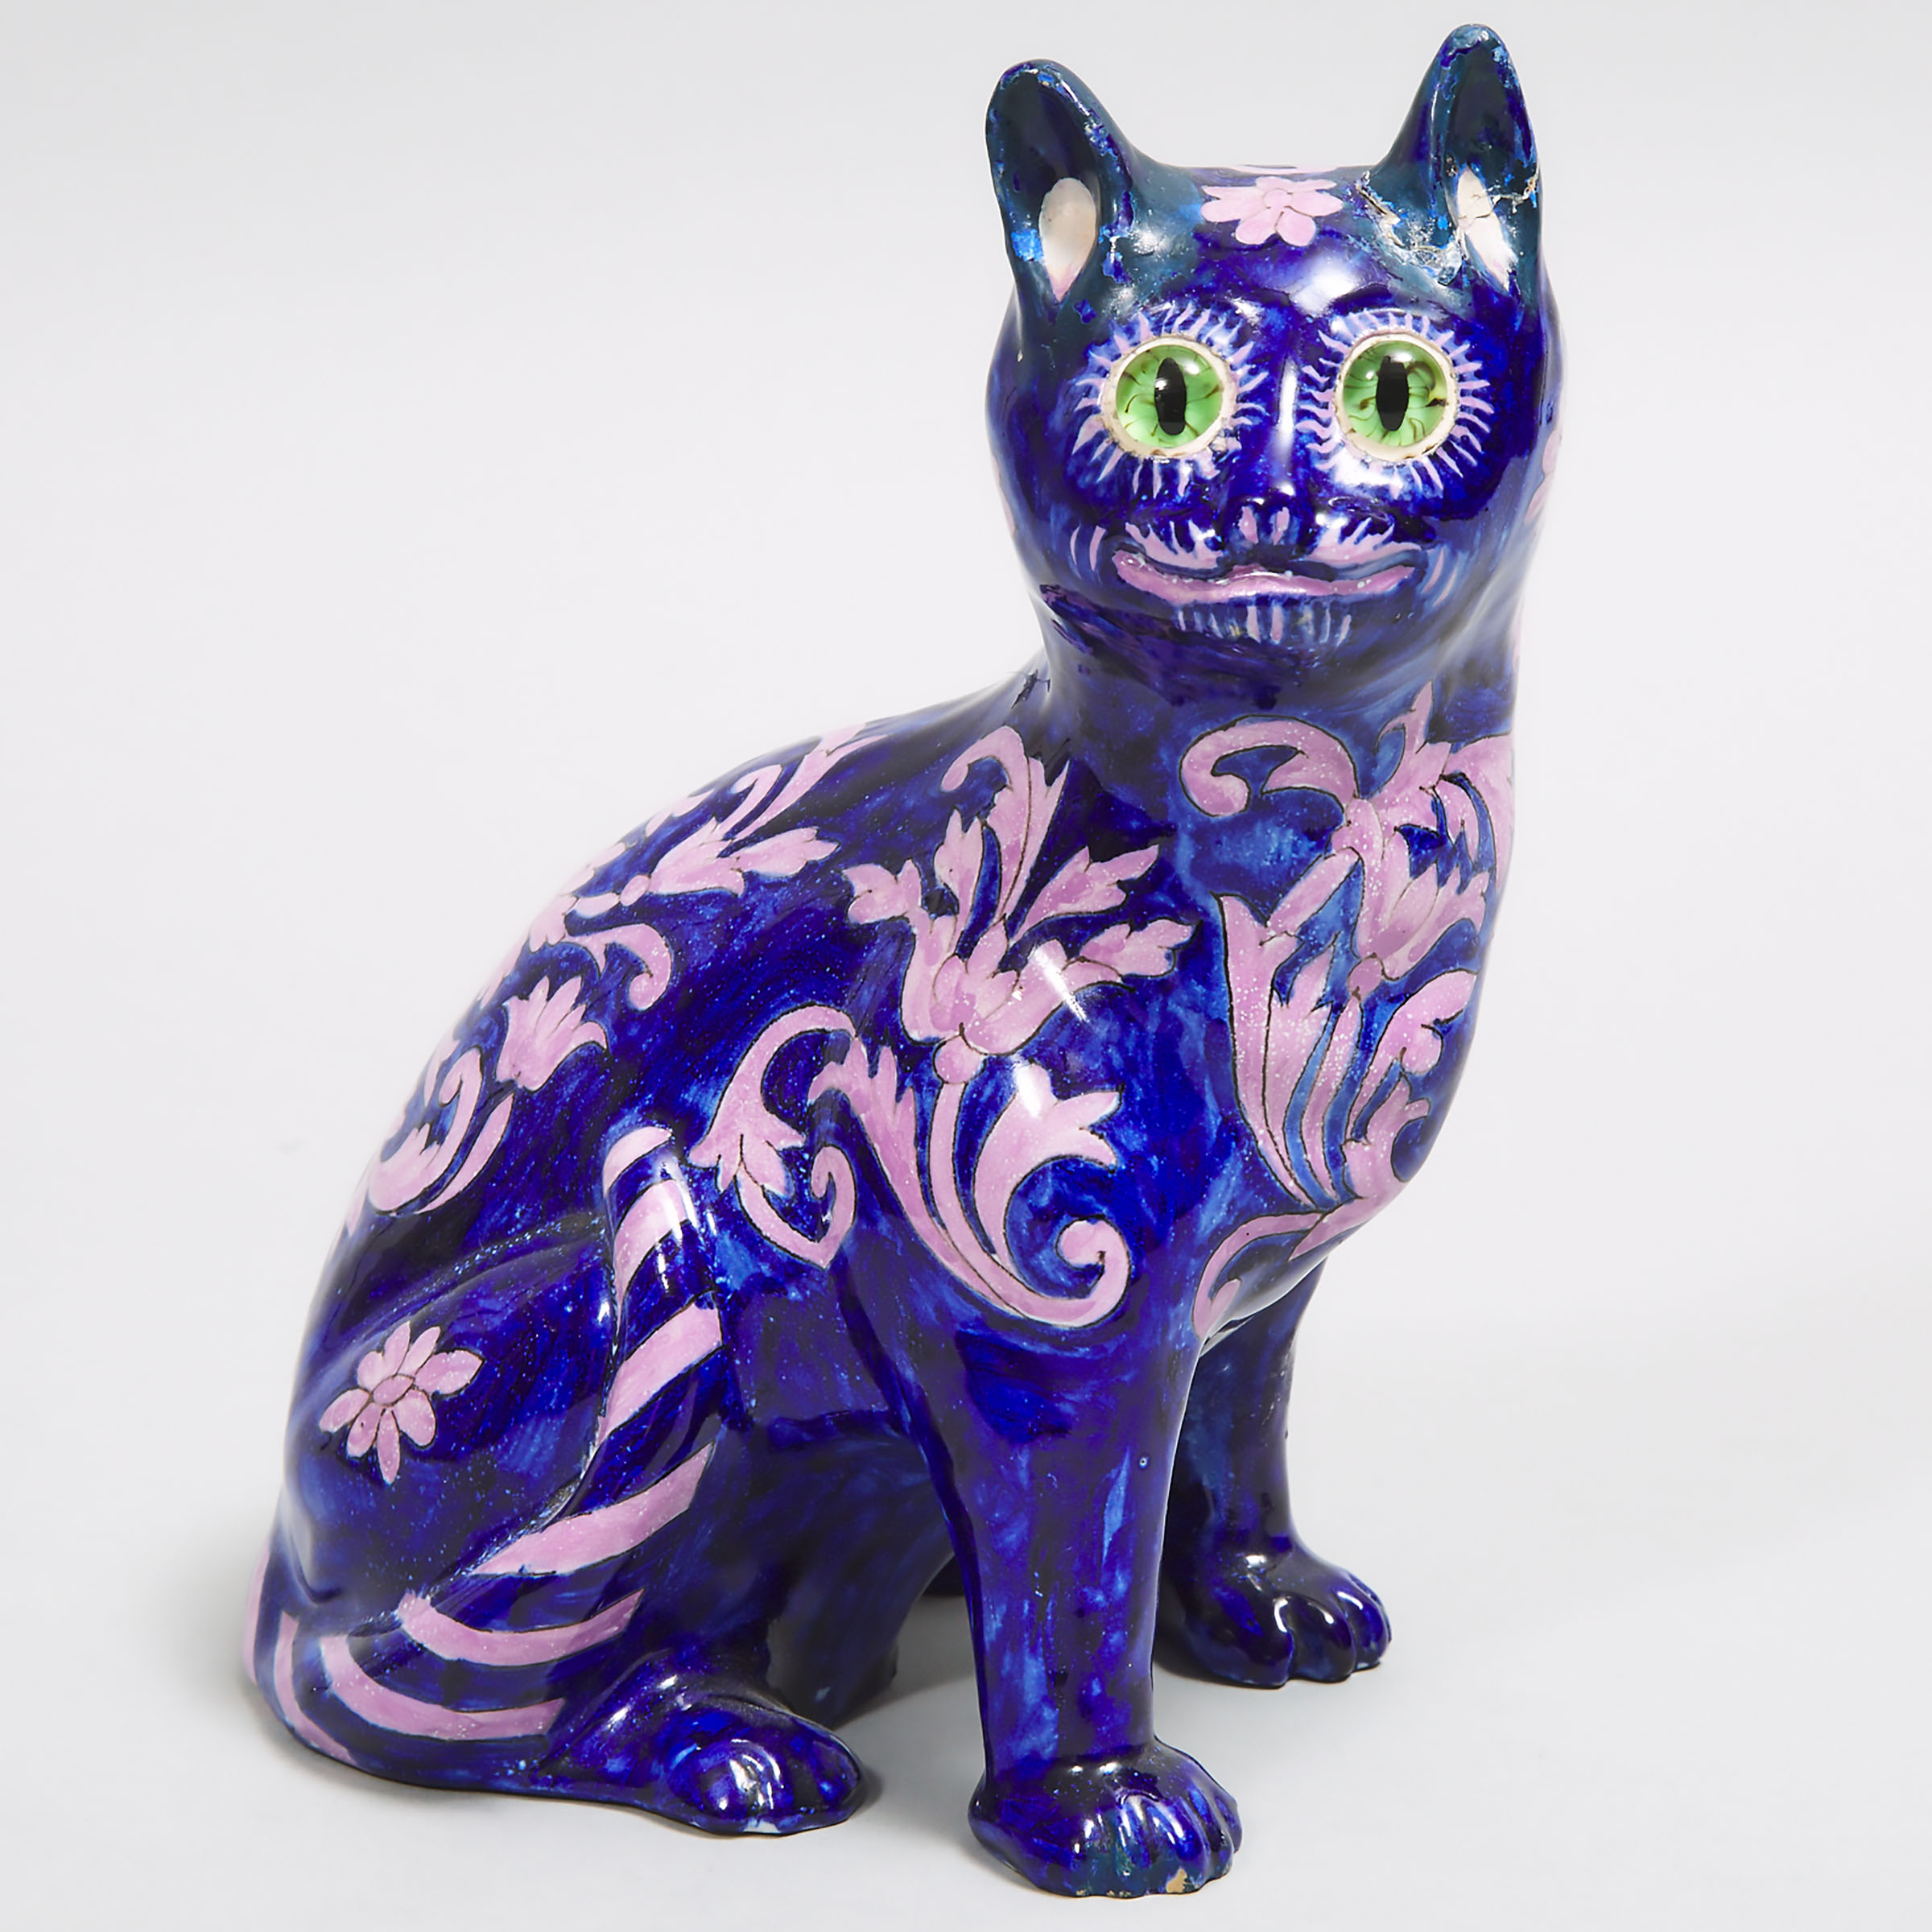 Mosanic Pottery Model of a Cat, early 20th century 